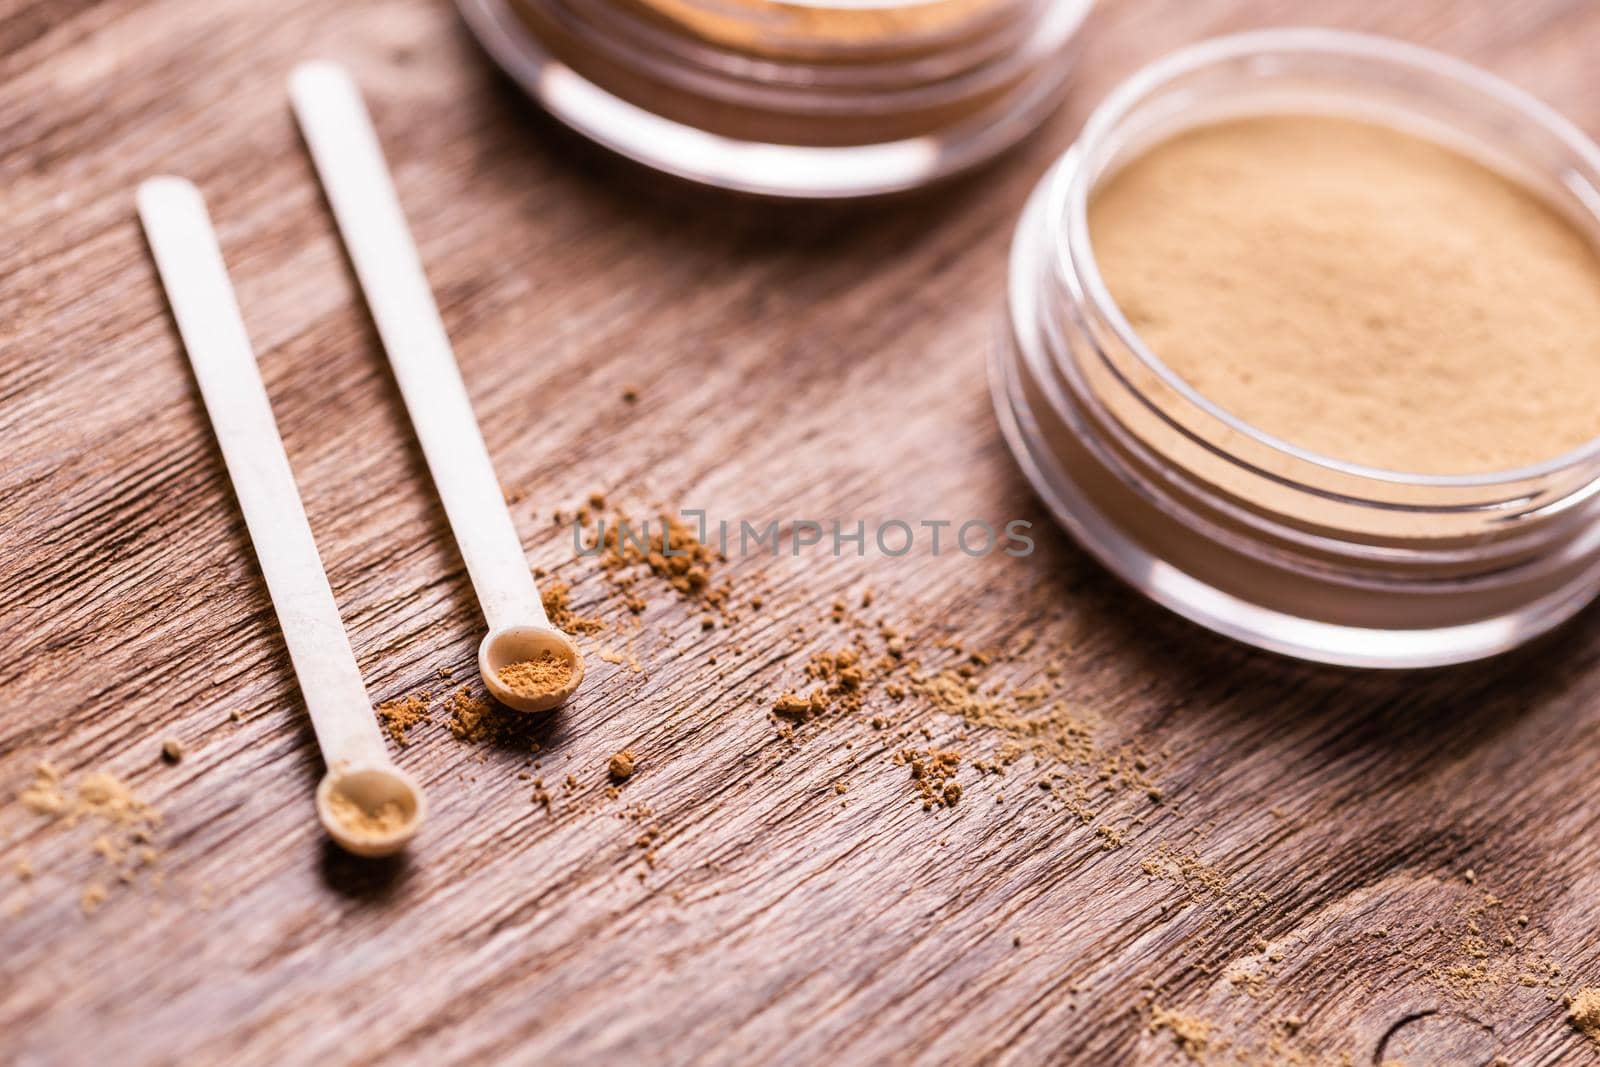 Mineral powder of different colors with a spoon dispenser for make-up on wooden background by Satura86